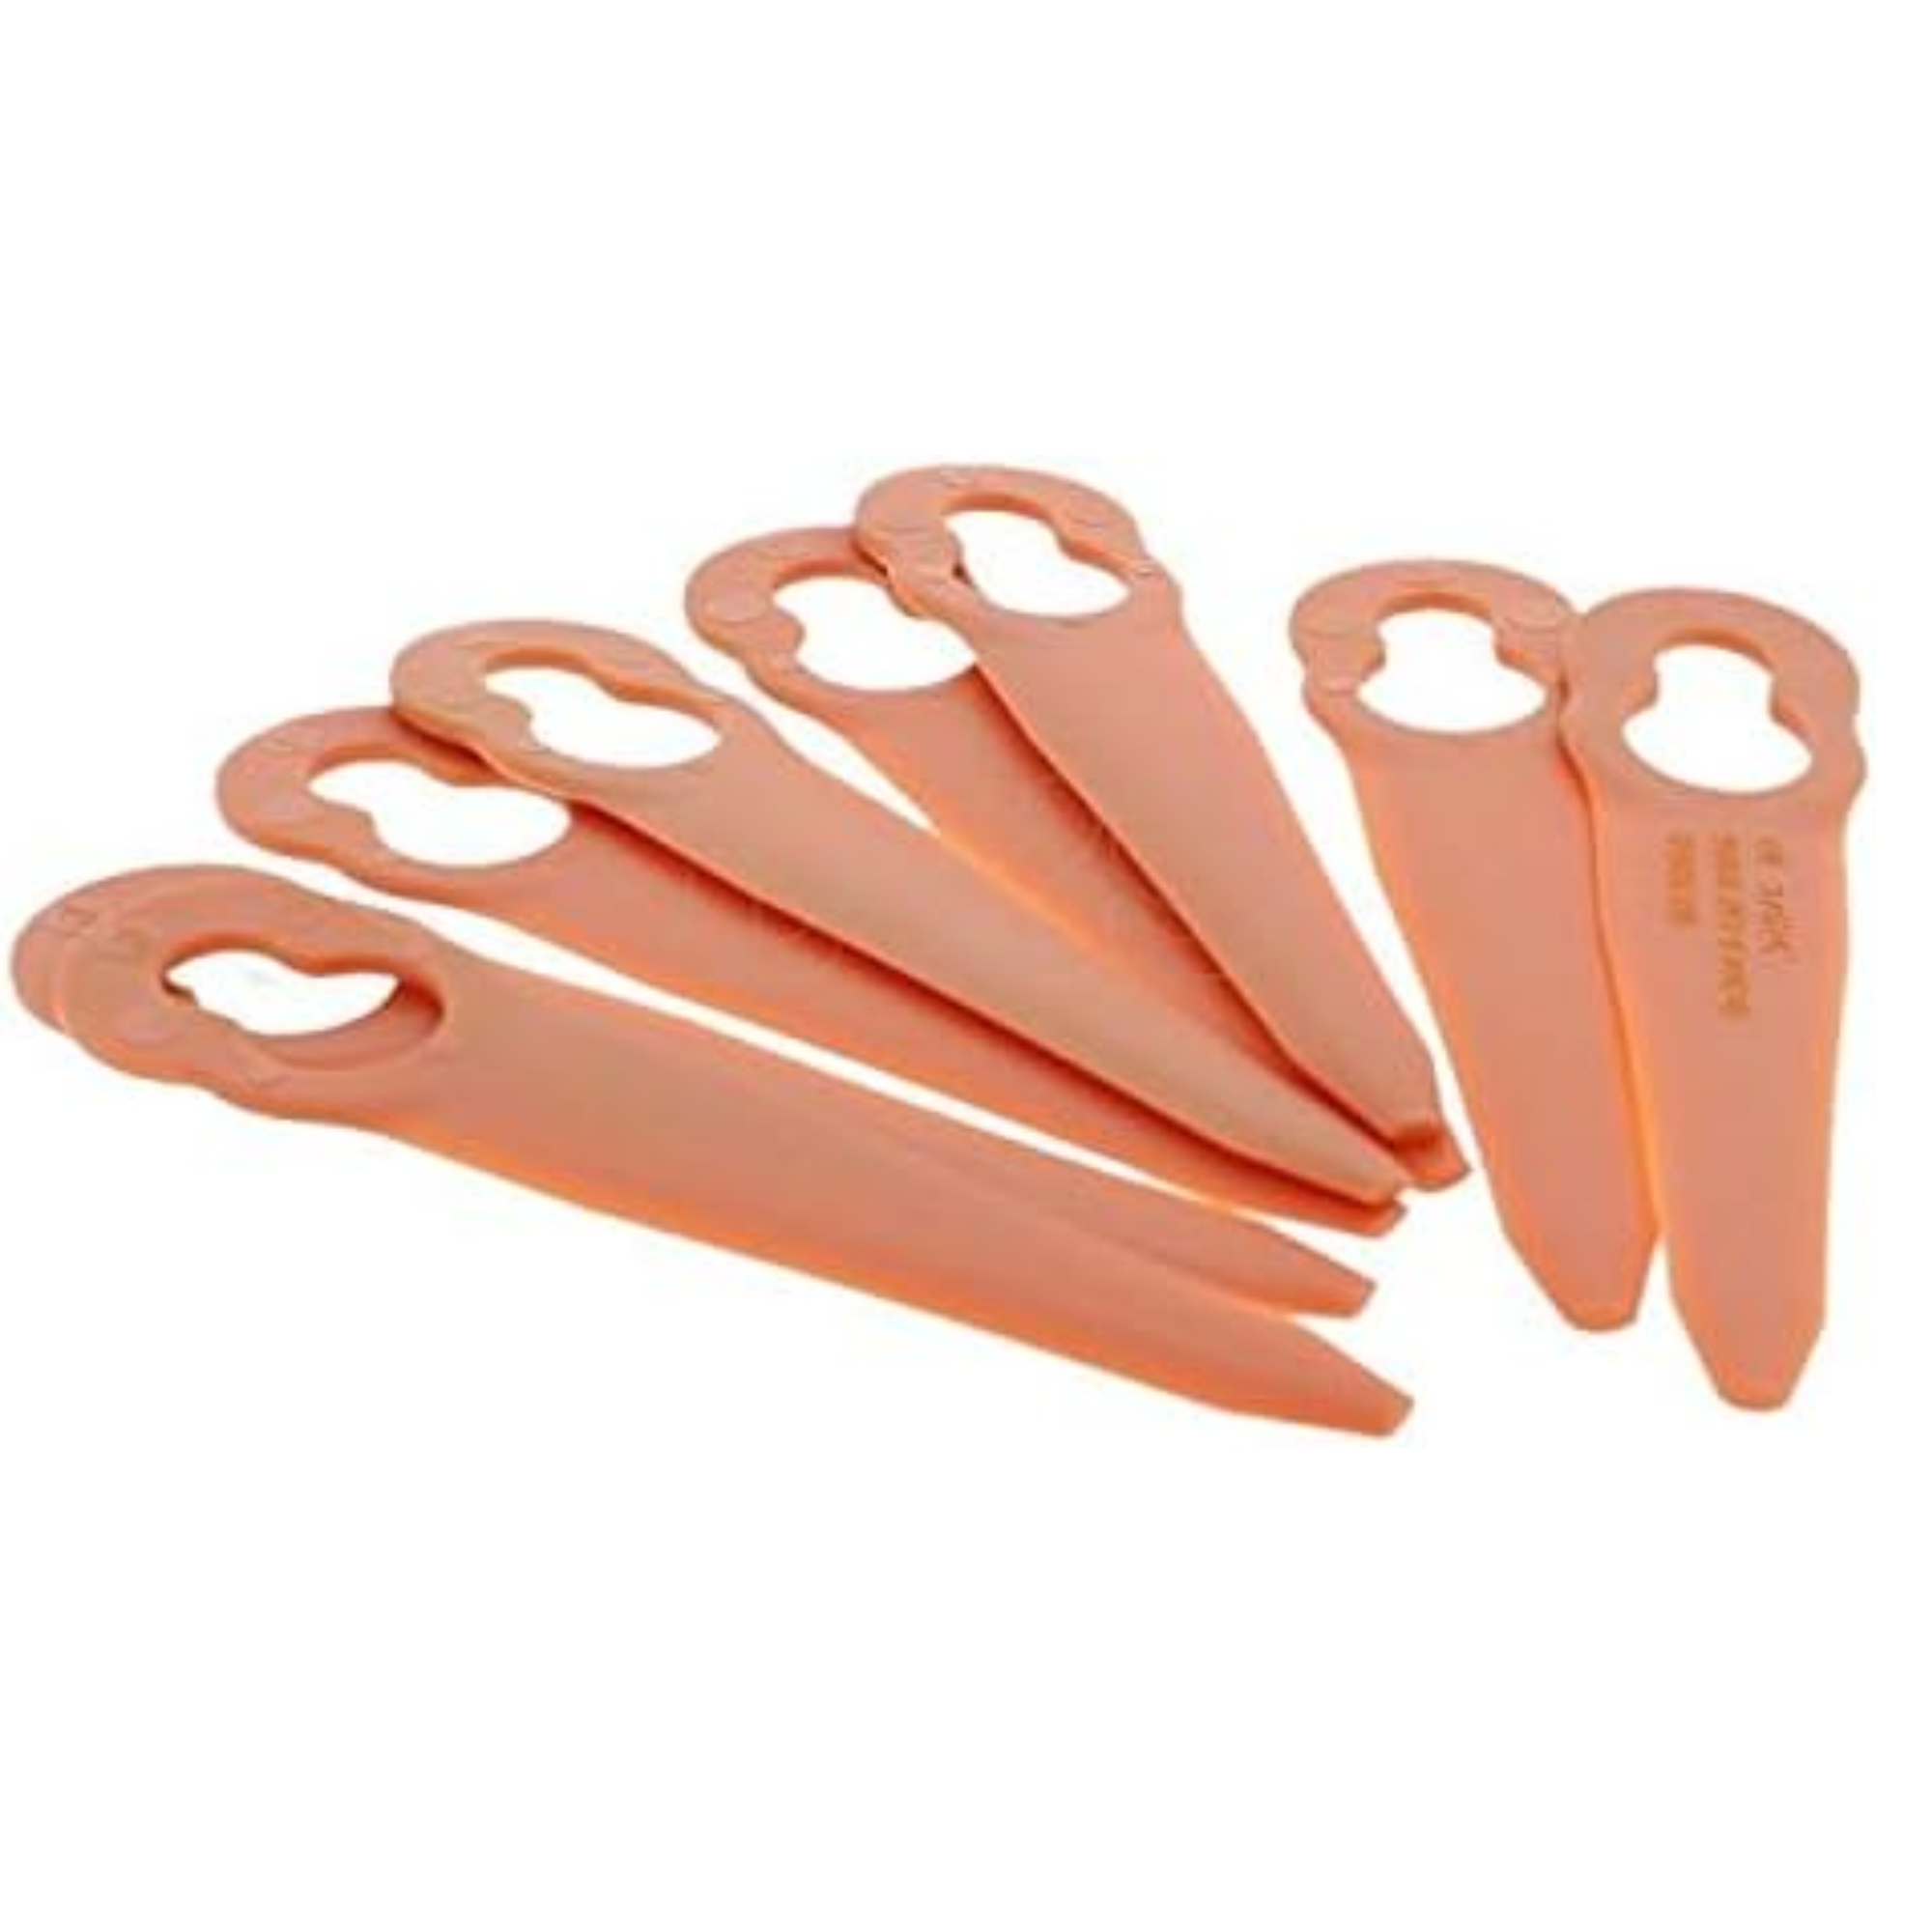 Stihl 2-2 PolyCut Replacment Blades (Pack of 8) | 4008 007 1000